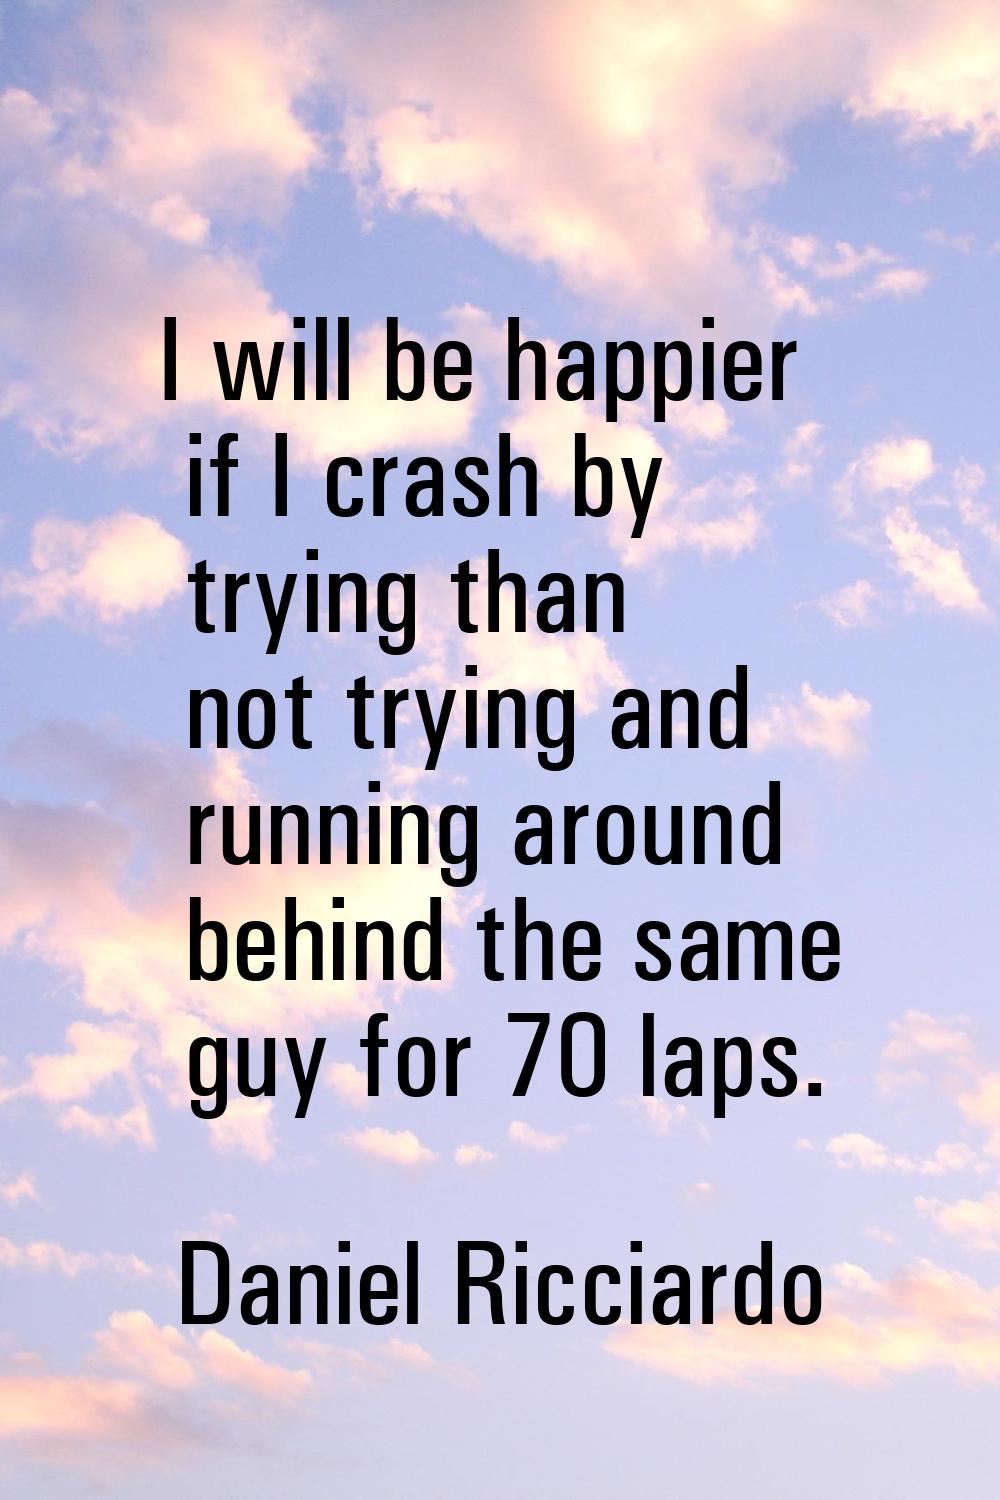 I will be happier if I crash by trying than not trying and running around behind the same guy for 7